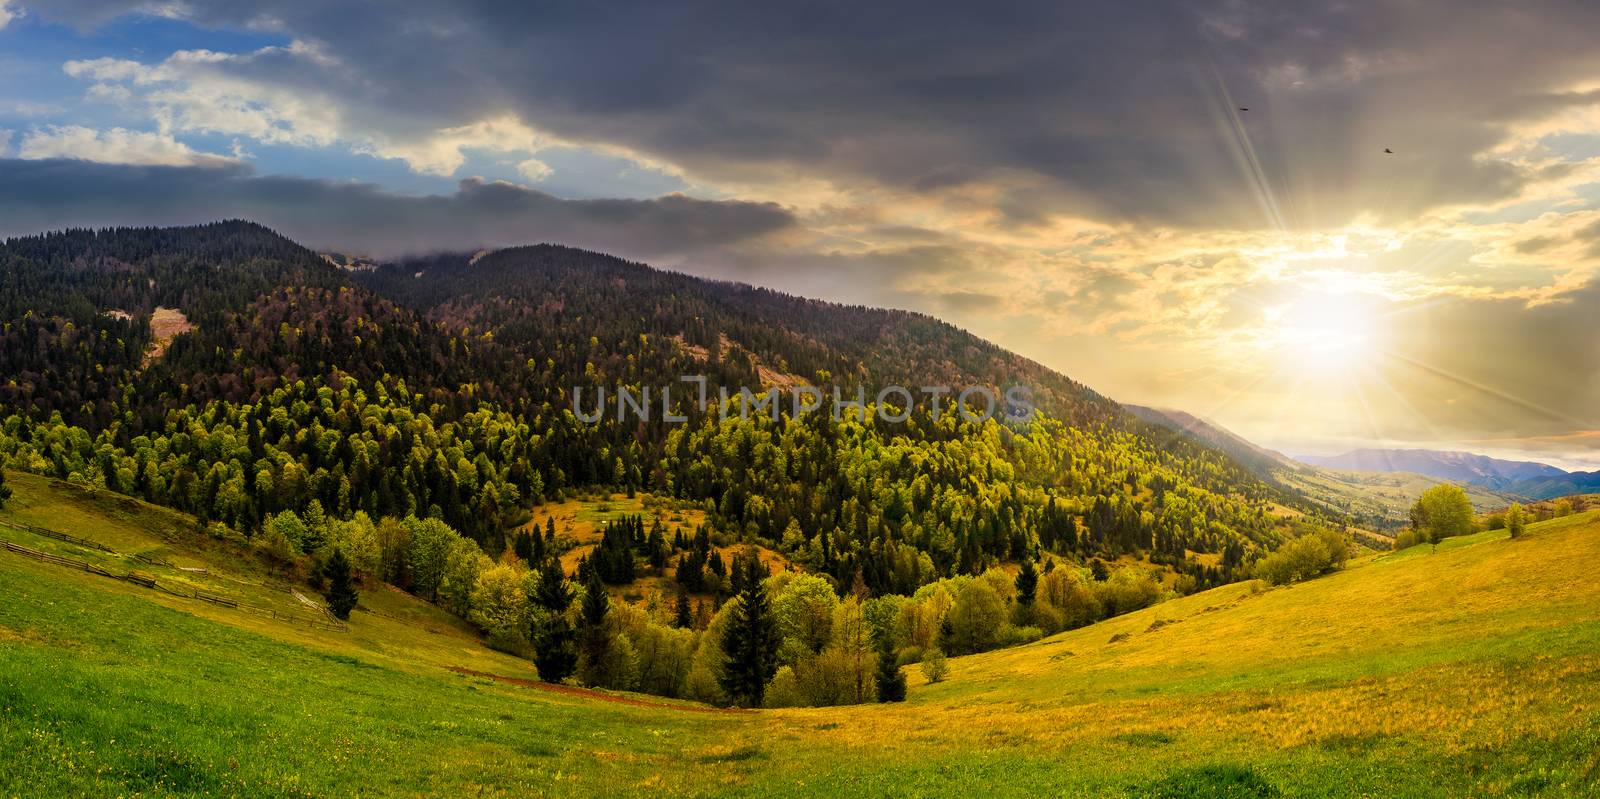 meadow with trees in mountains at sunset by Pellinni